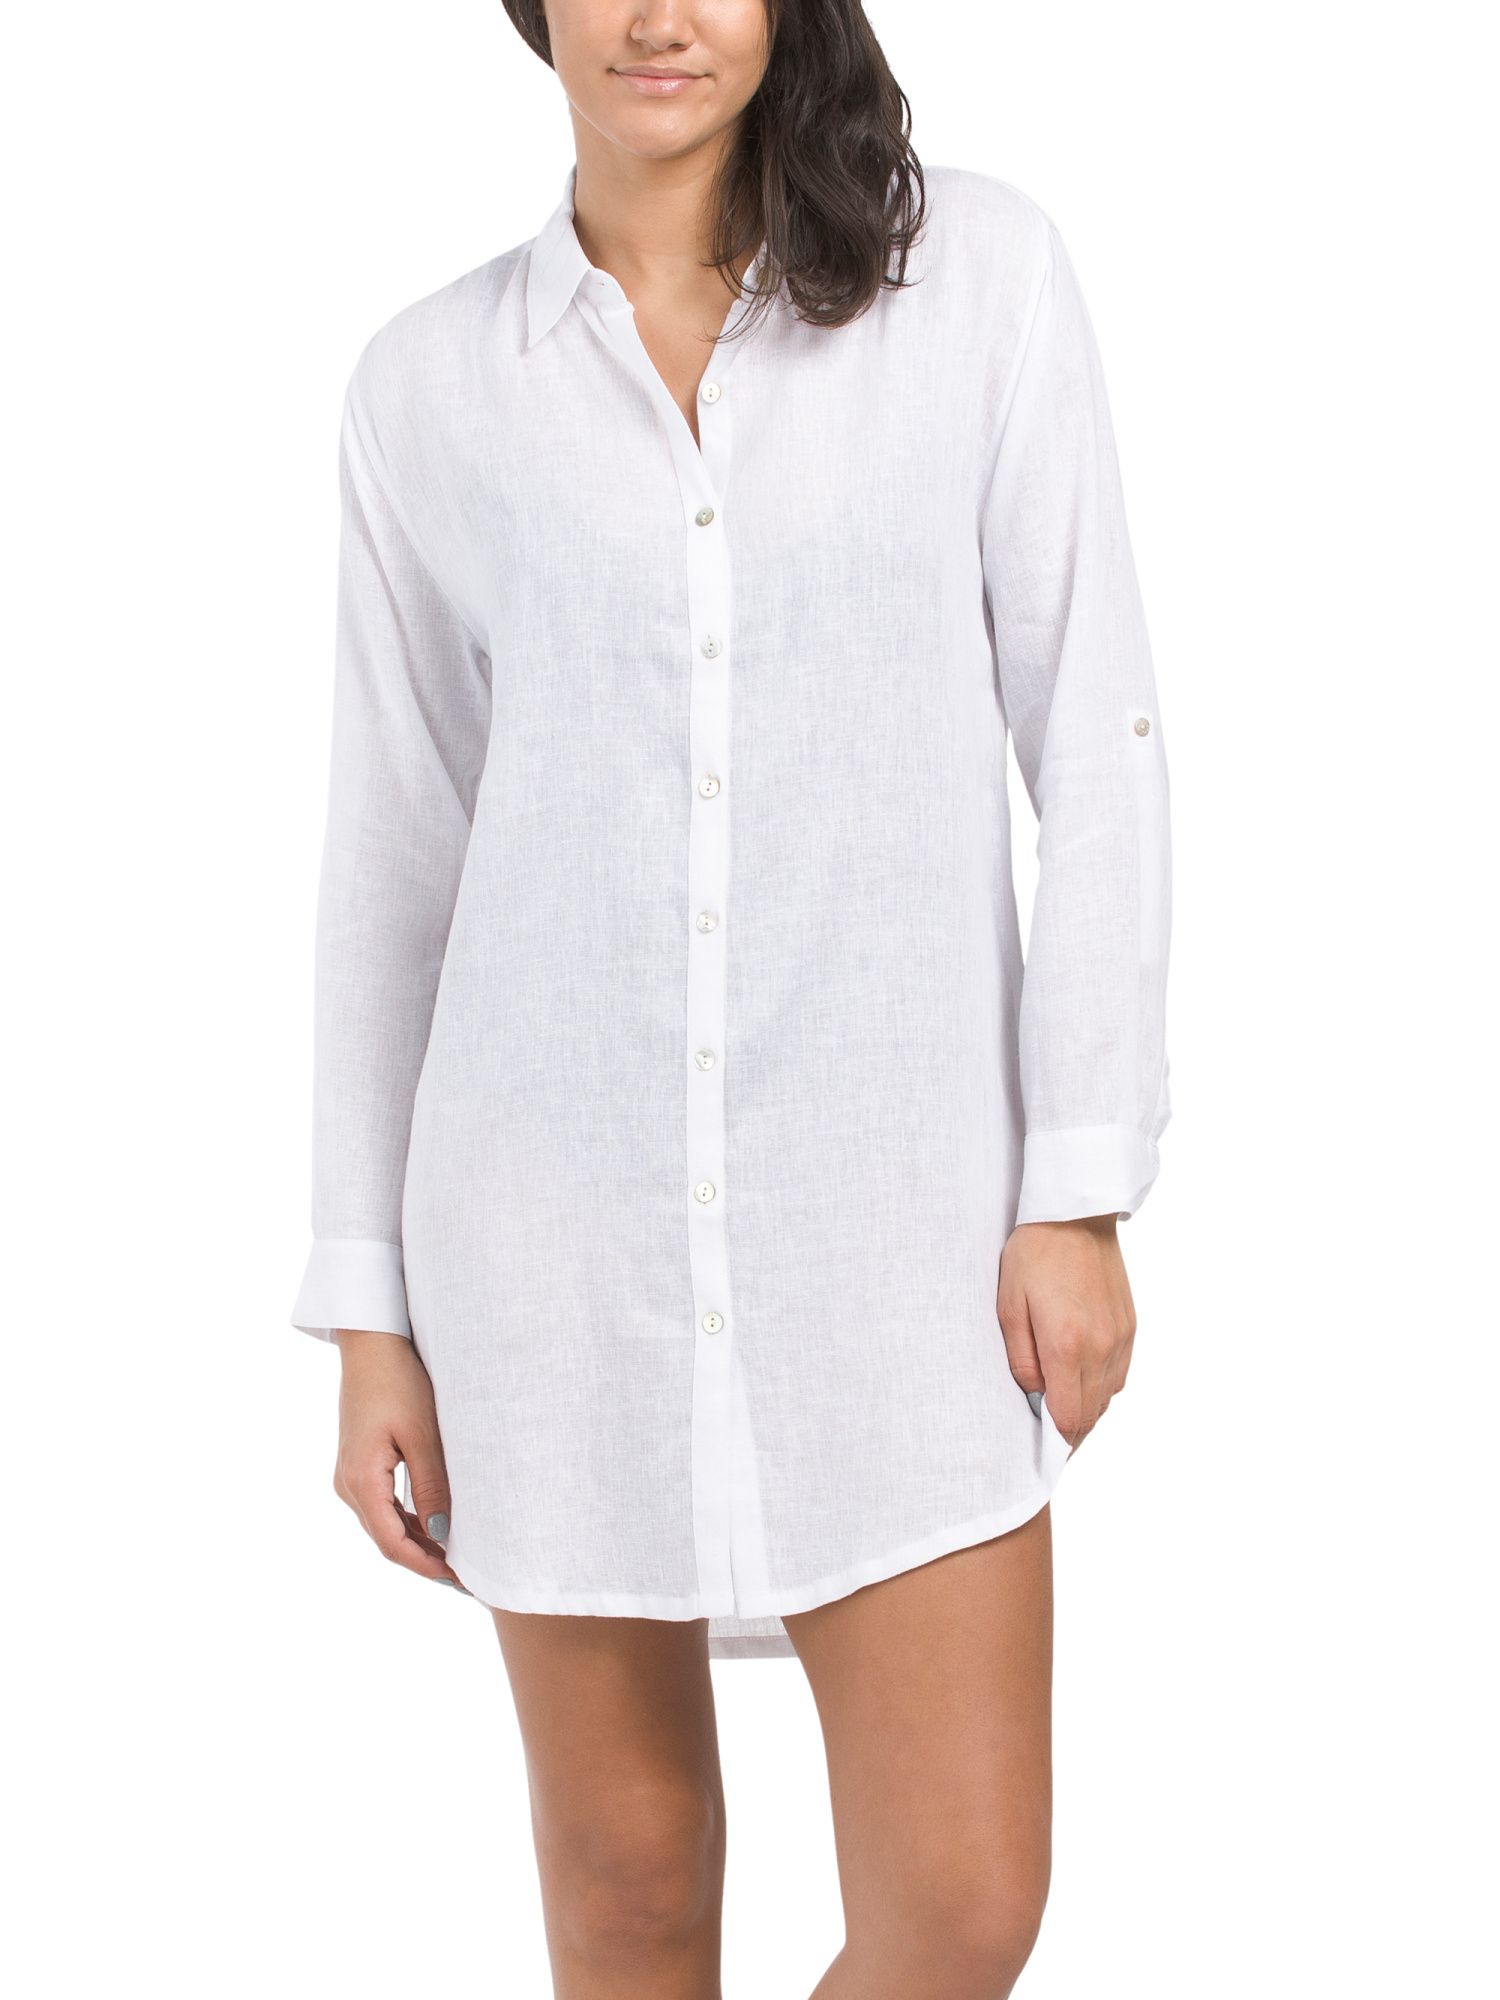 Linen And Rayon Button Down Cover-up Shirt | TJ Maxx